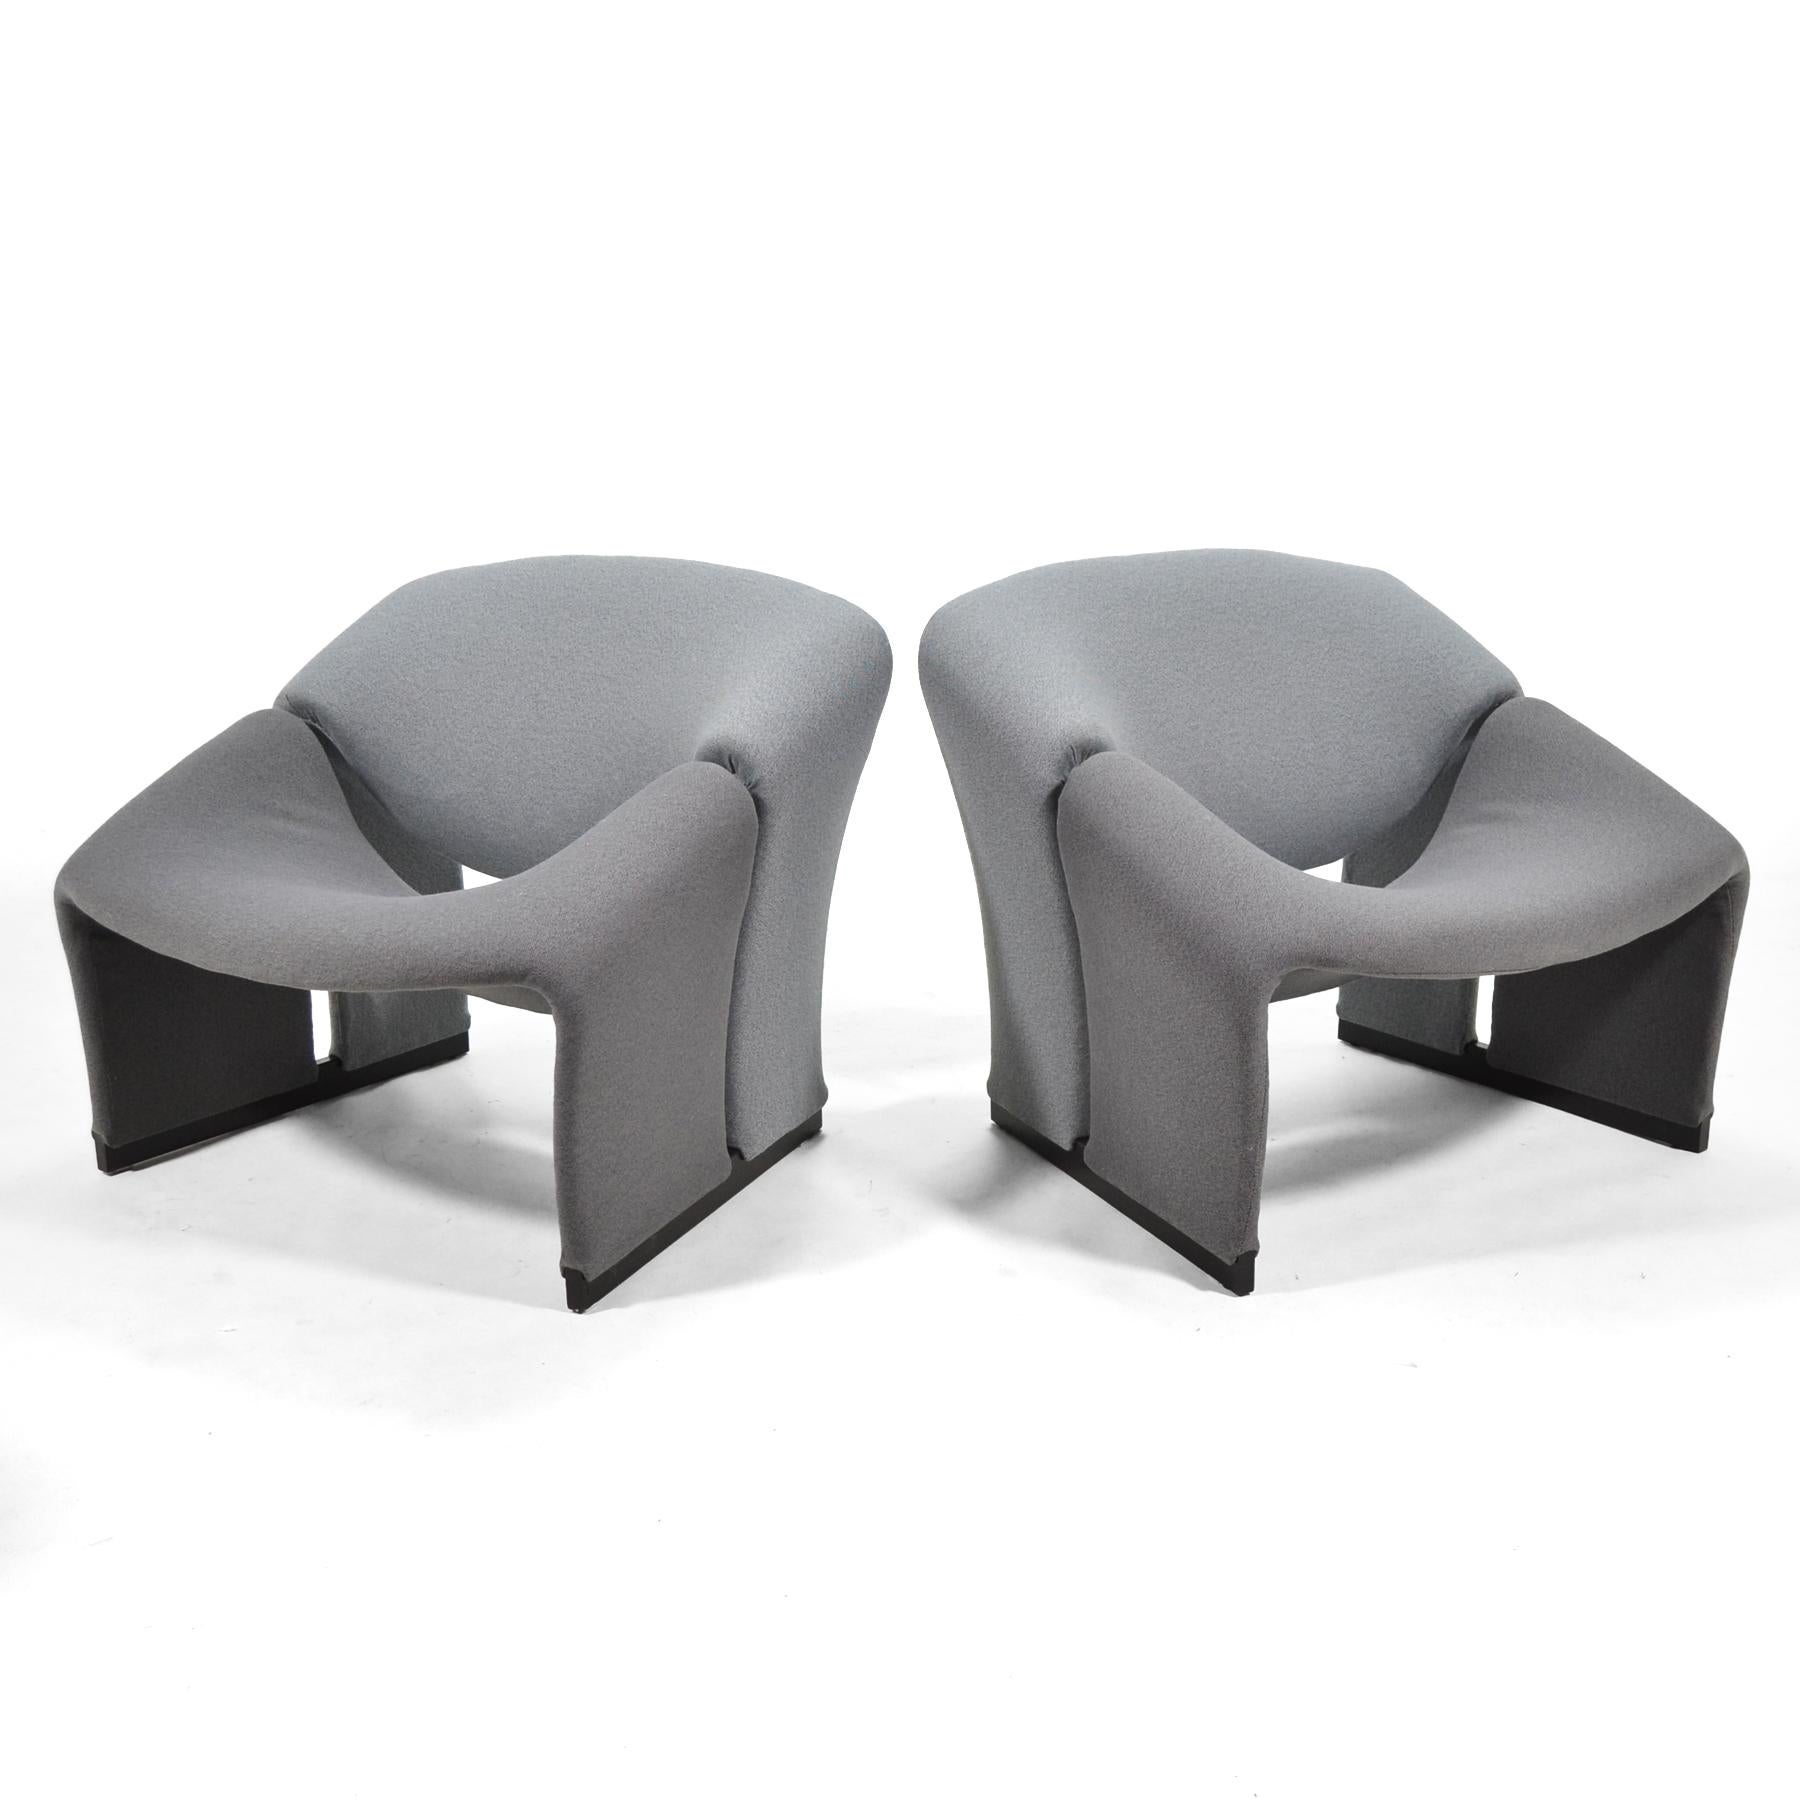 Designed in 1966 this first interaction of the design which would later evolve into a chair nicknamed the 